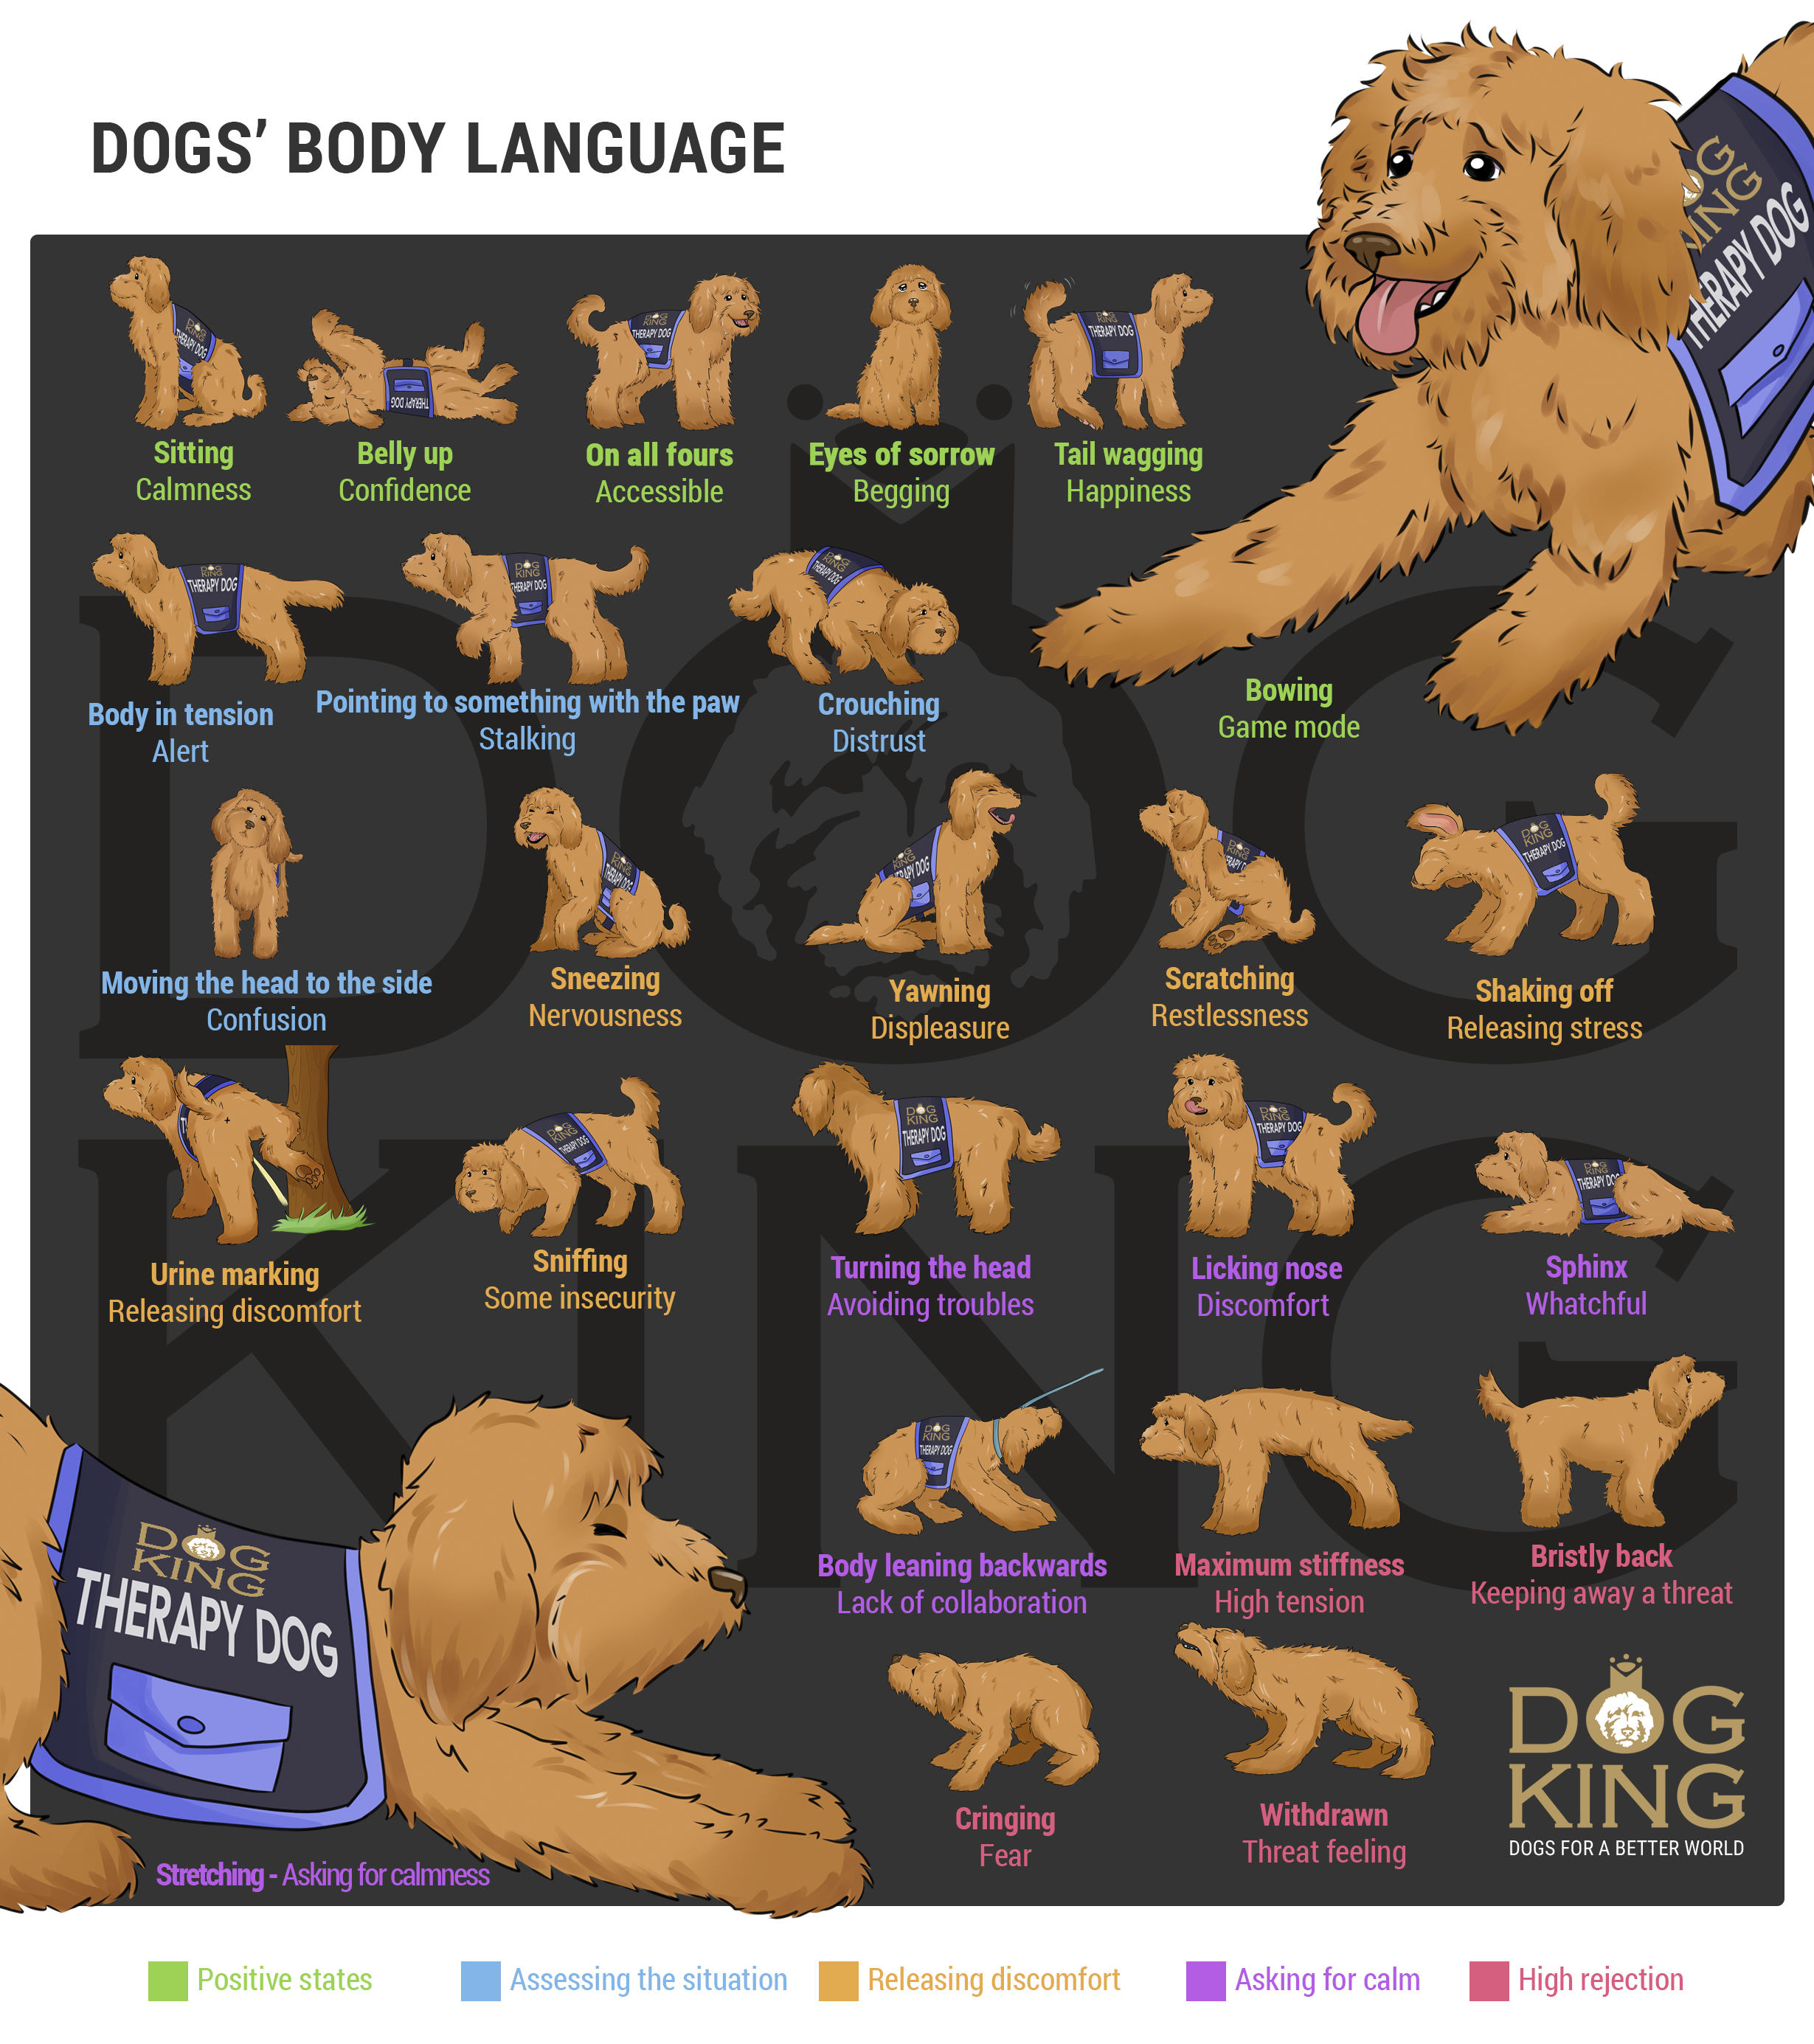 body language gestures and meanings